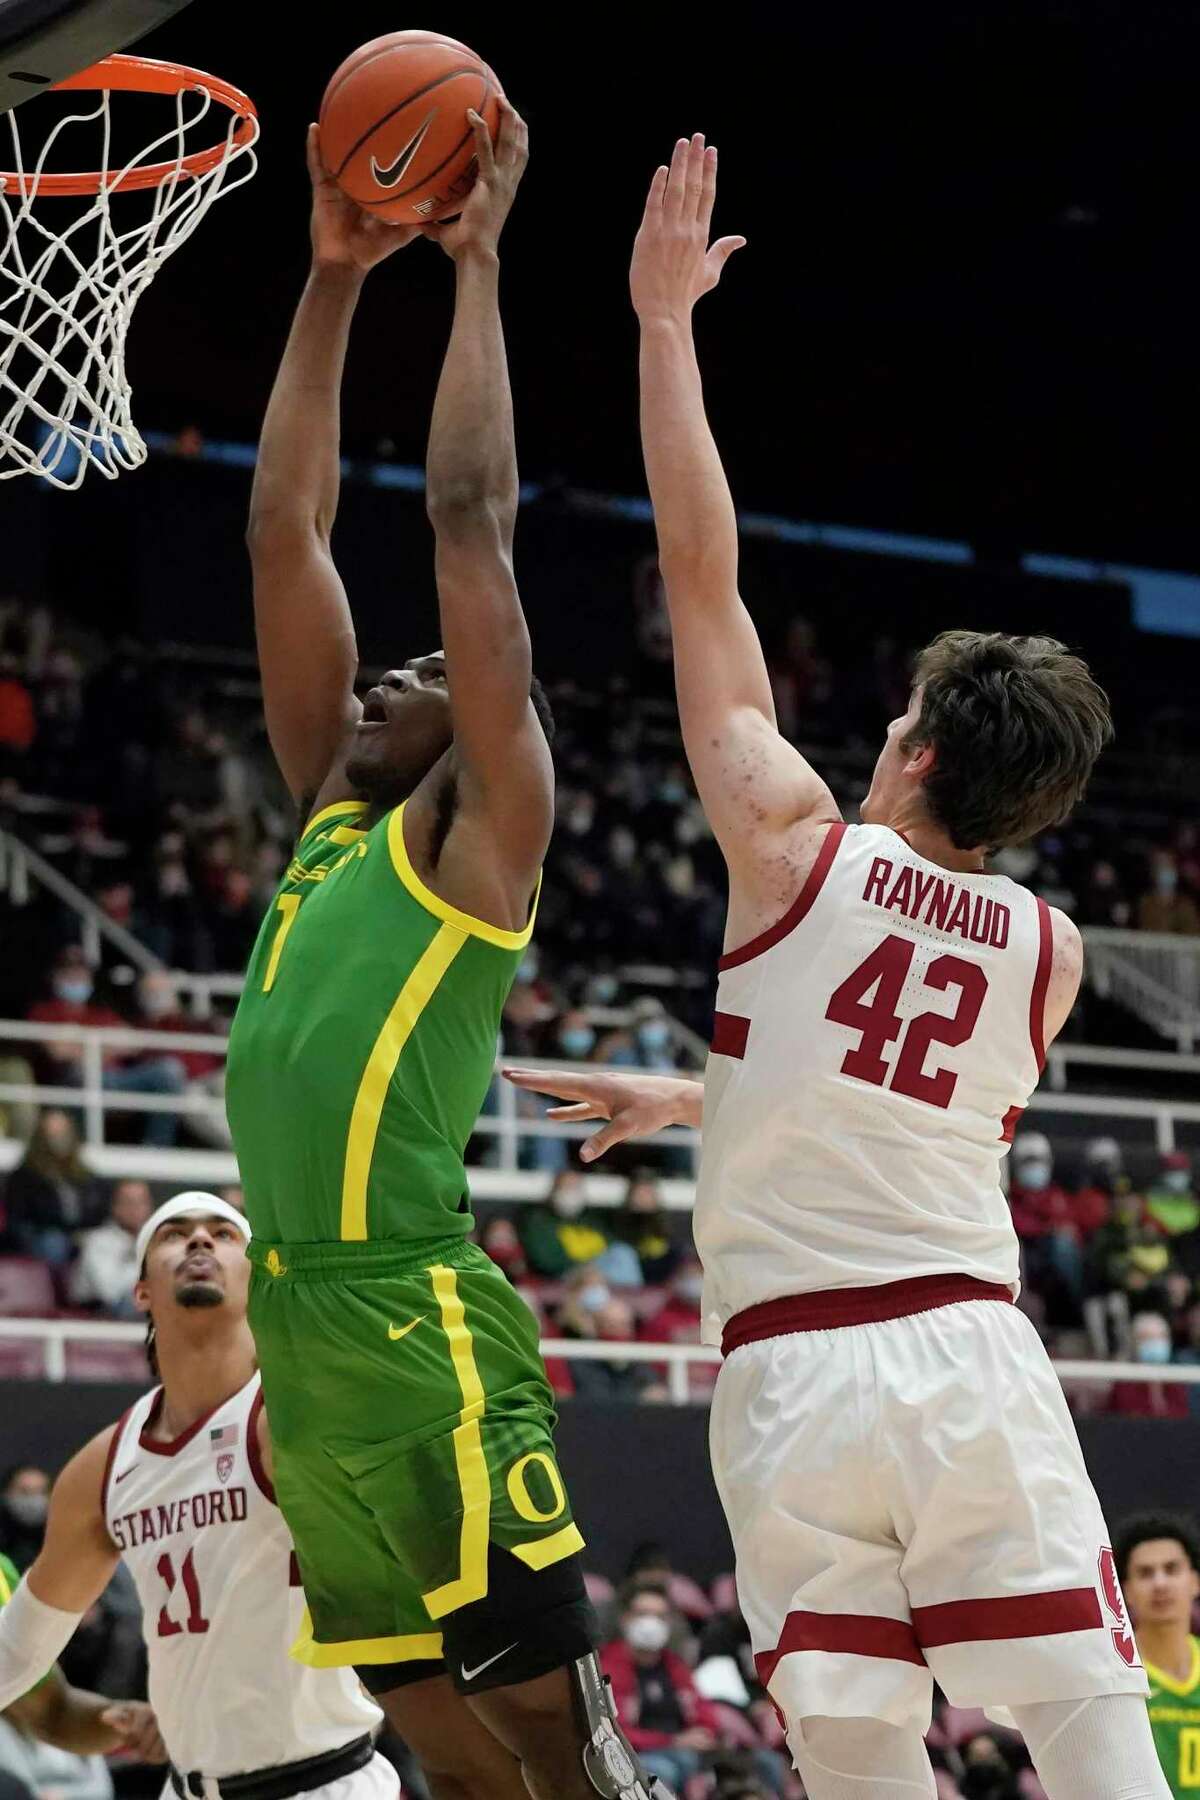 Oregon center N'Faly Dante, left, dunks next to Stanford forward Maxime Raynaud (42) during the first half of an NCAA college basketball game in Stanford, Calif., Sunday, Dec. 12, 2021. (AP Photo/Jeff Chiu)